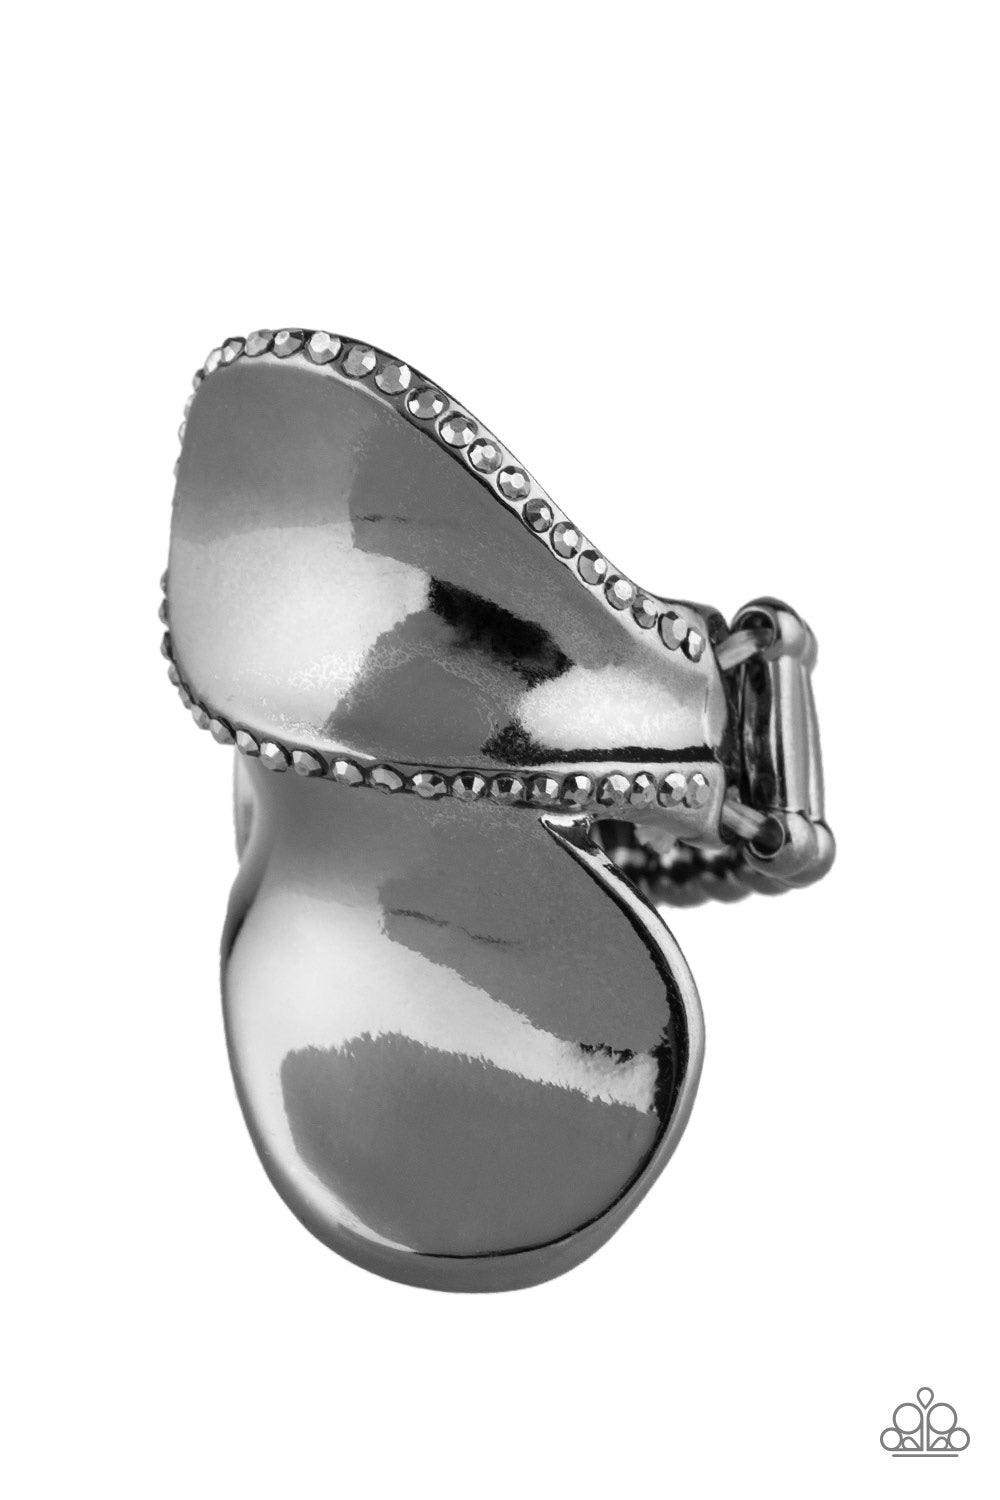 Paparazzi Accessories Fabulously Folded - Black Bordered in sections of glittery hematite rhinestones, glistening gunmetal frames fold across the finger for an edgy look. Features a stretchy band for a flexible fit. Jewelry